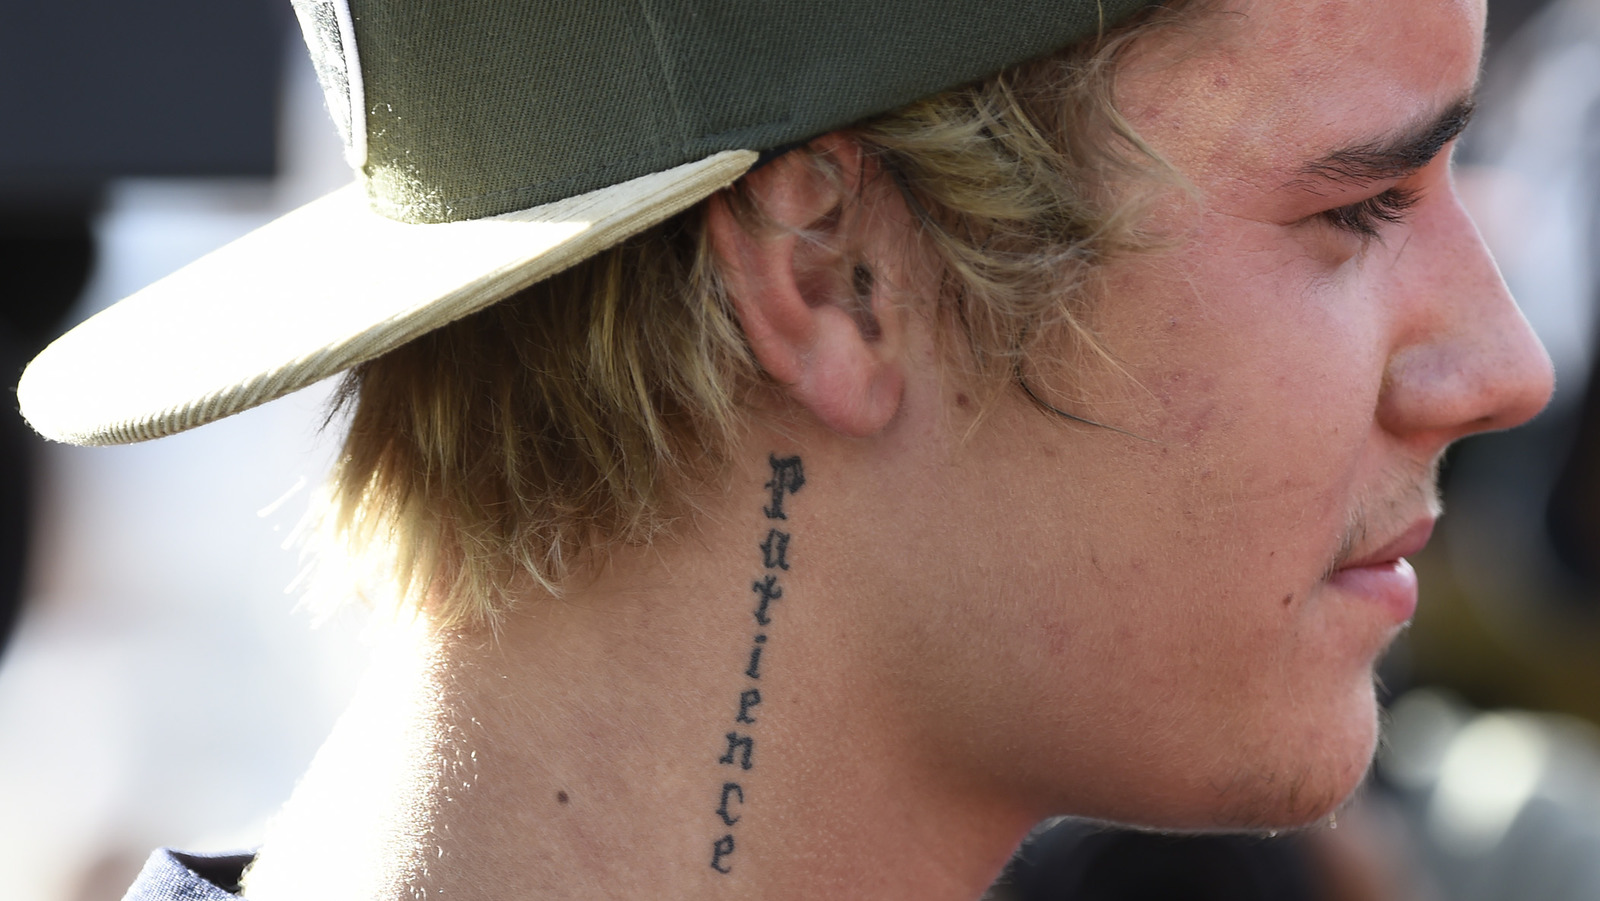 11 Blessed Neck Tattoo Ideas That Will Blow Your Mind  alexie